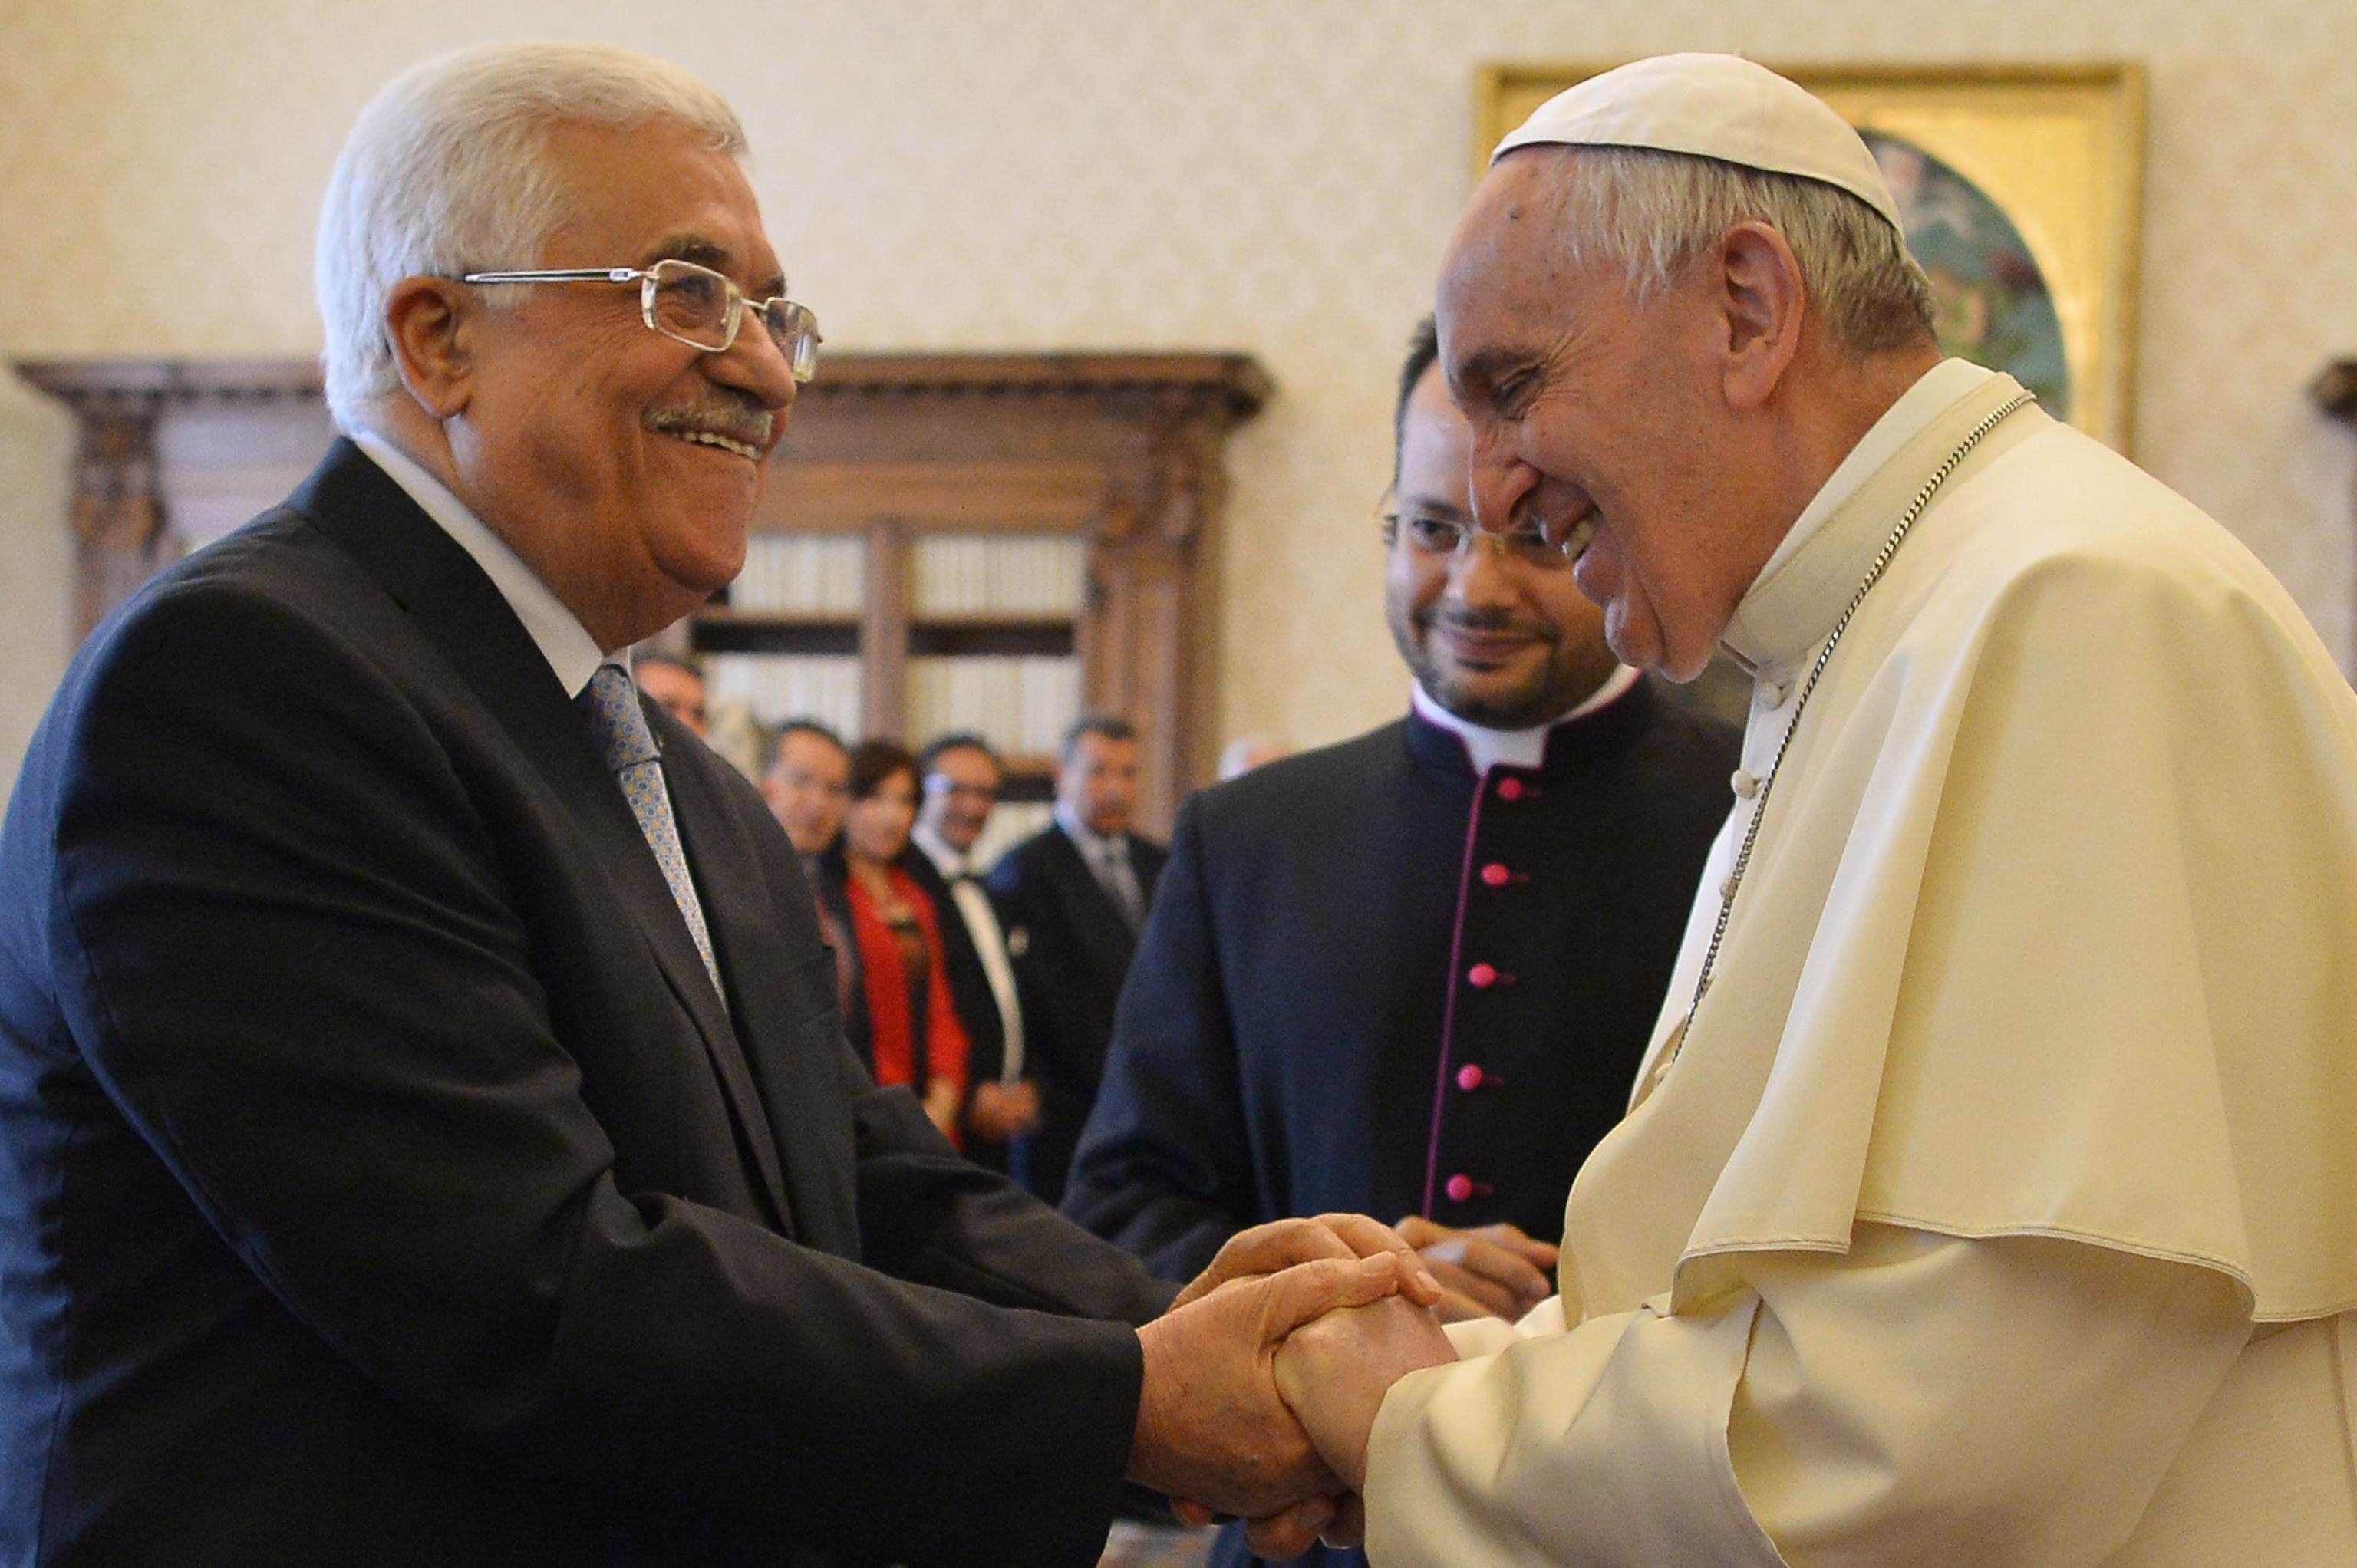 Pope Francis exchanges gifts with Palestinian authority President Mahmoud Abbas